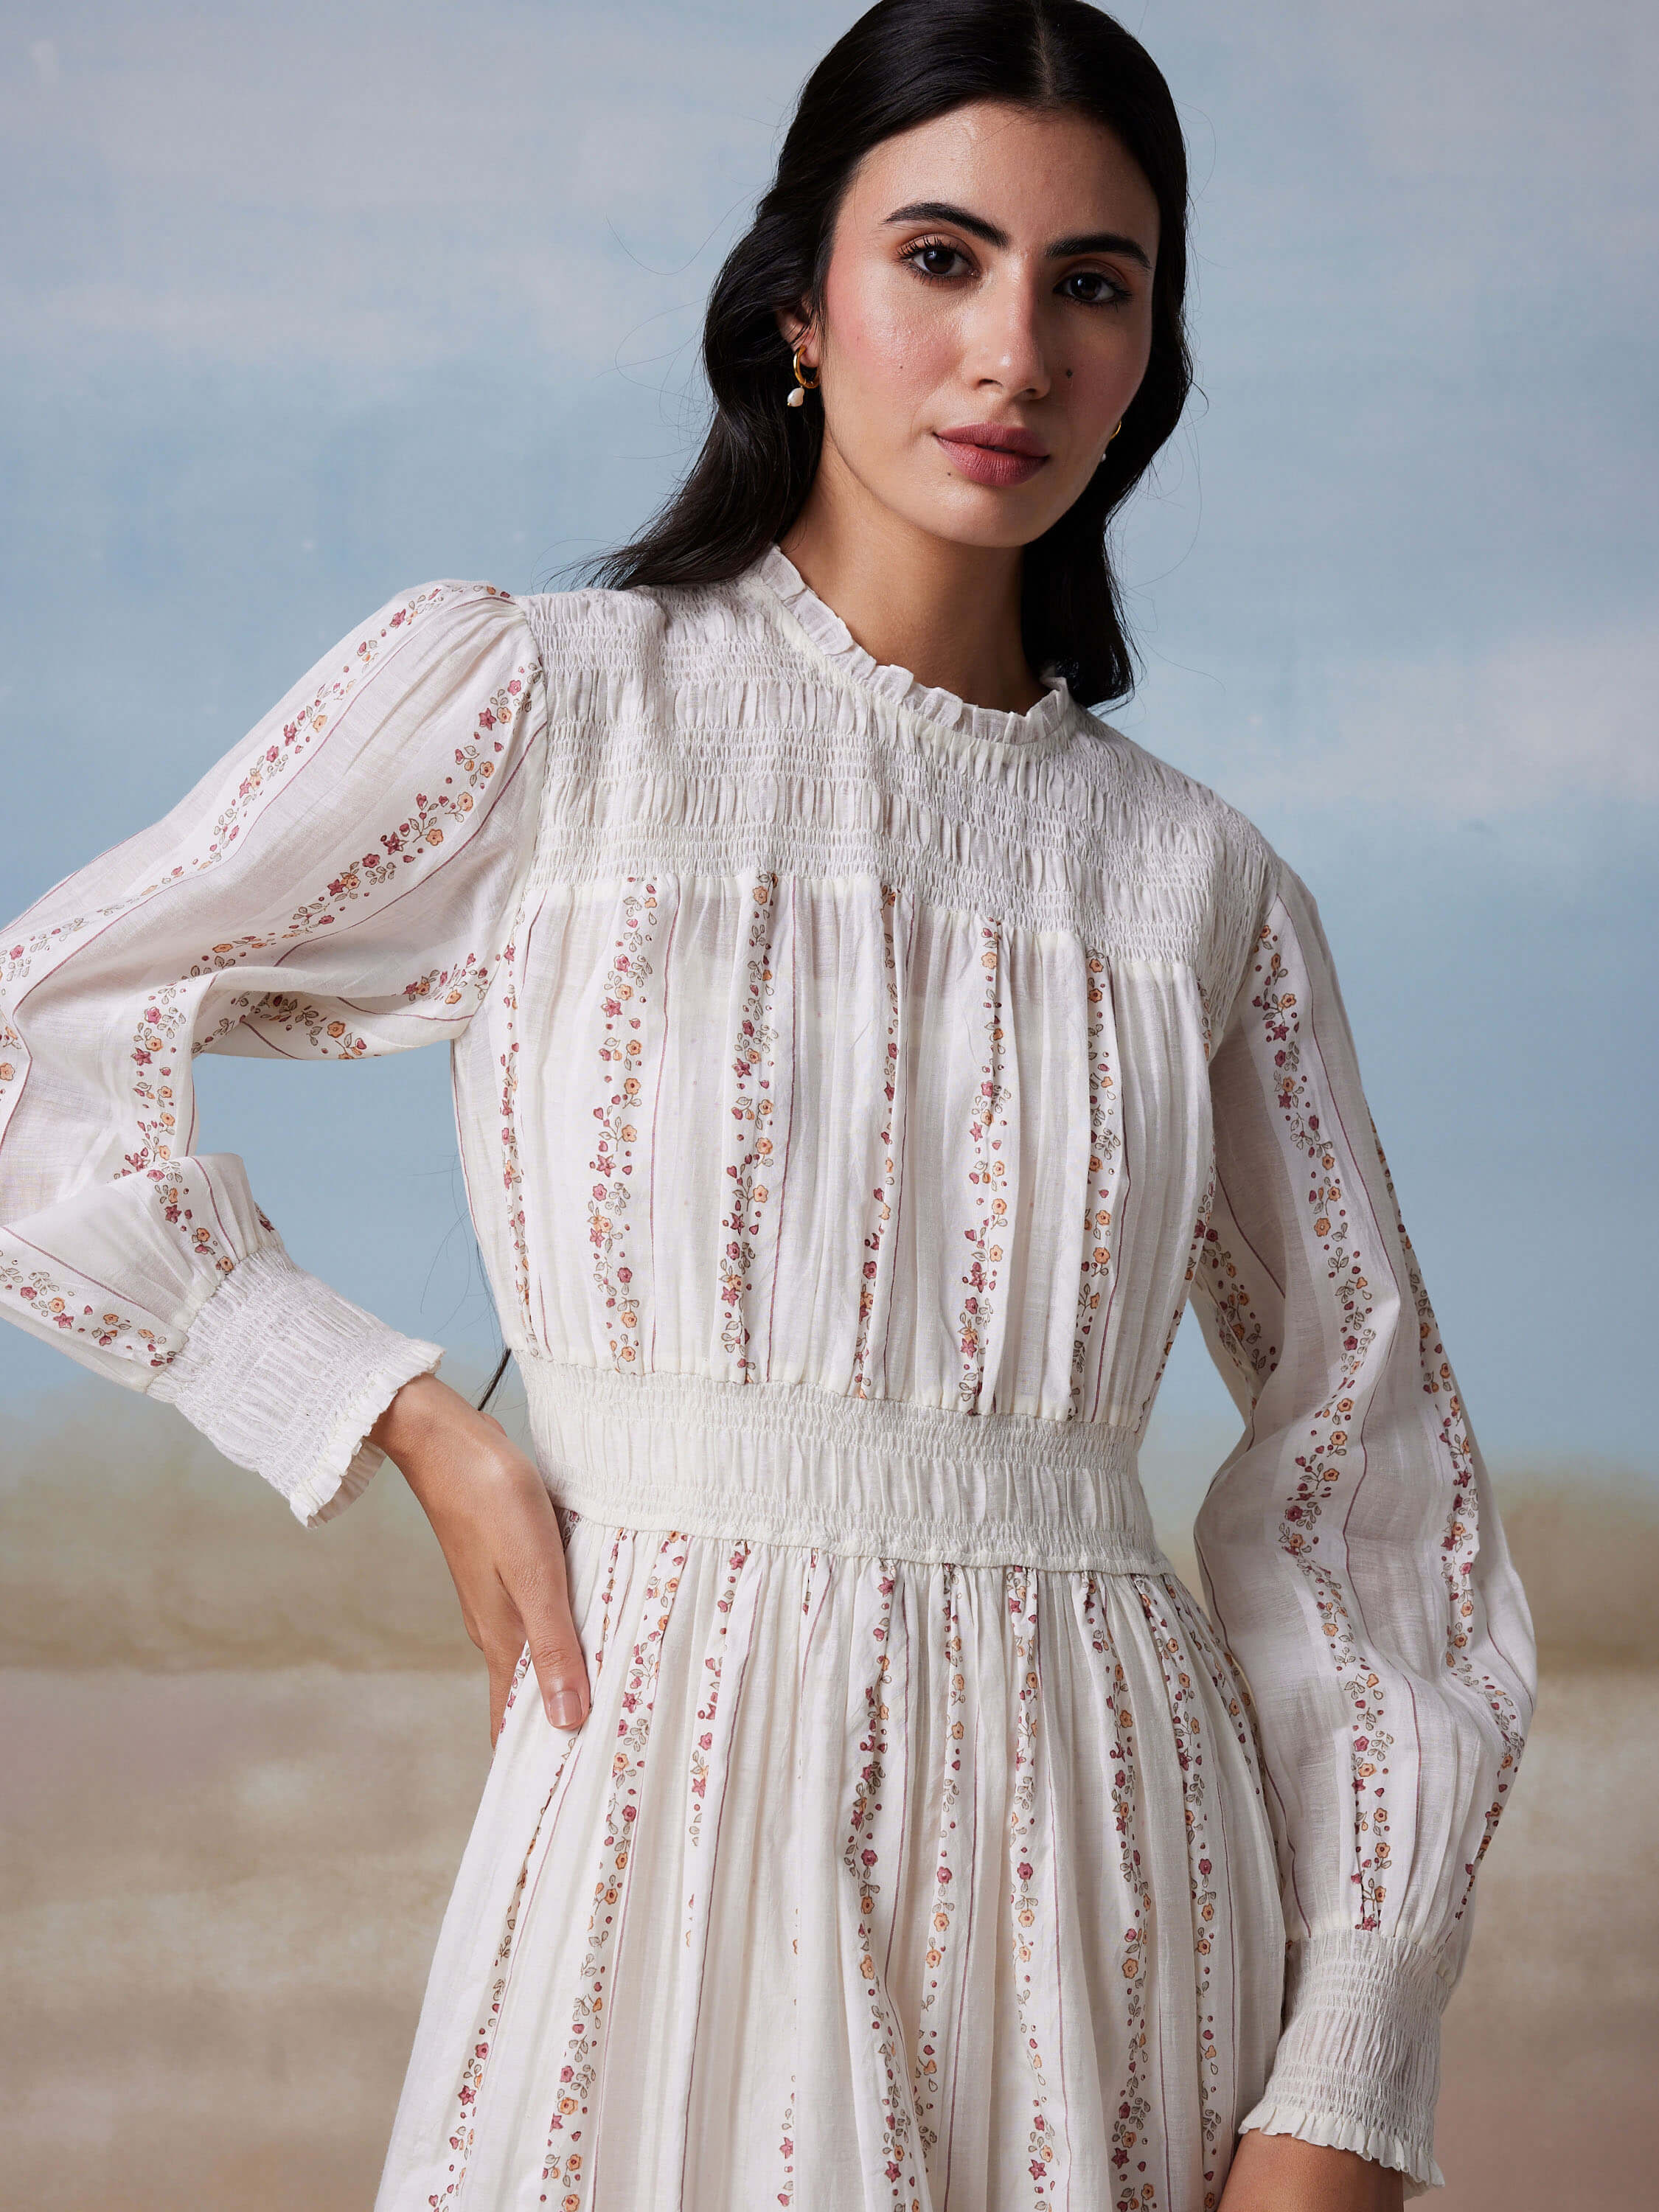 Woman in floral white dress with long sleeves.